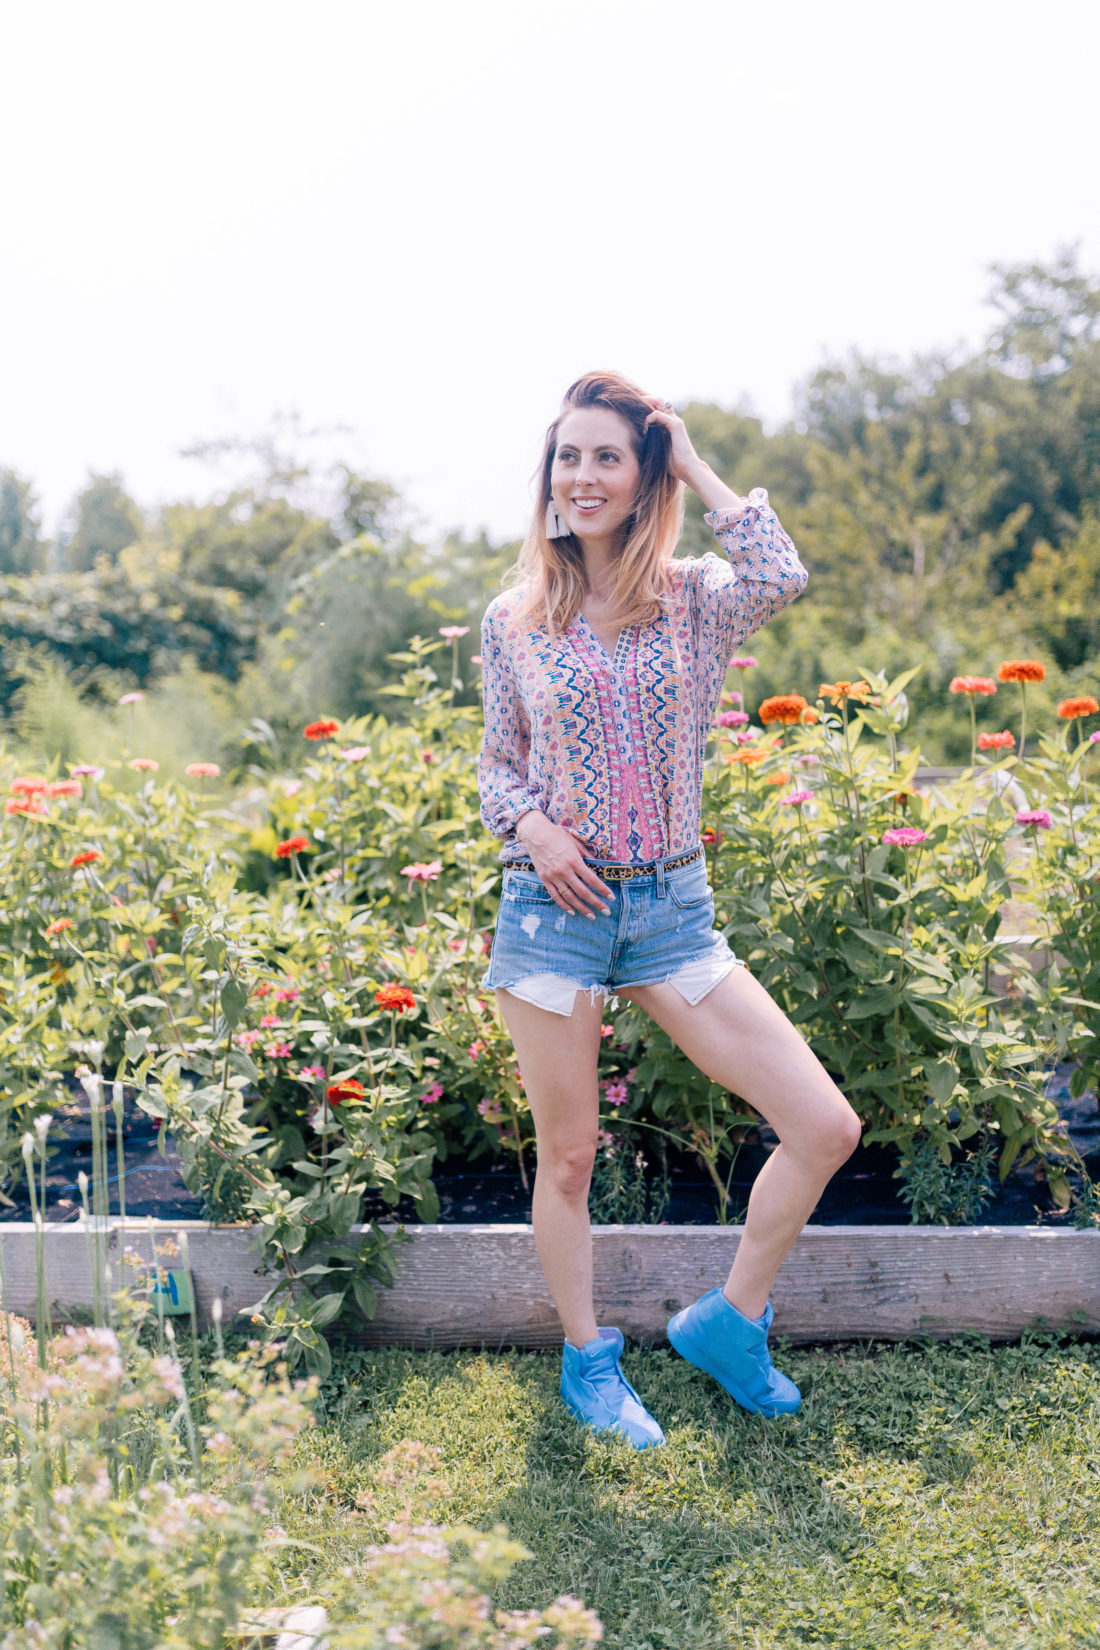 Eva Amurri Martino wears denim cutoffs and a printed top and stands in the garden of a local connecticut farm